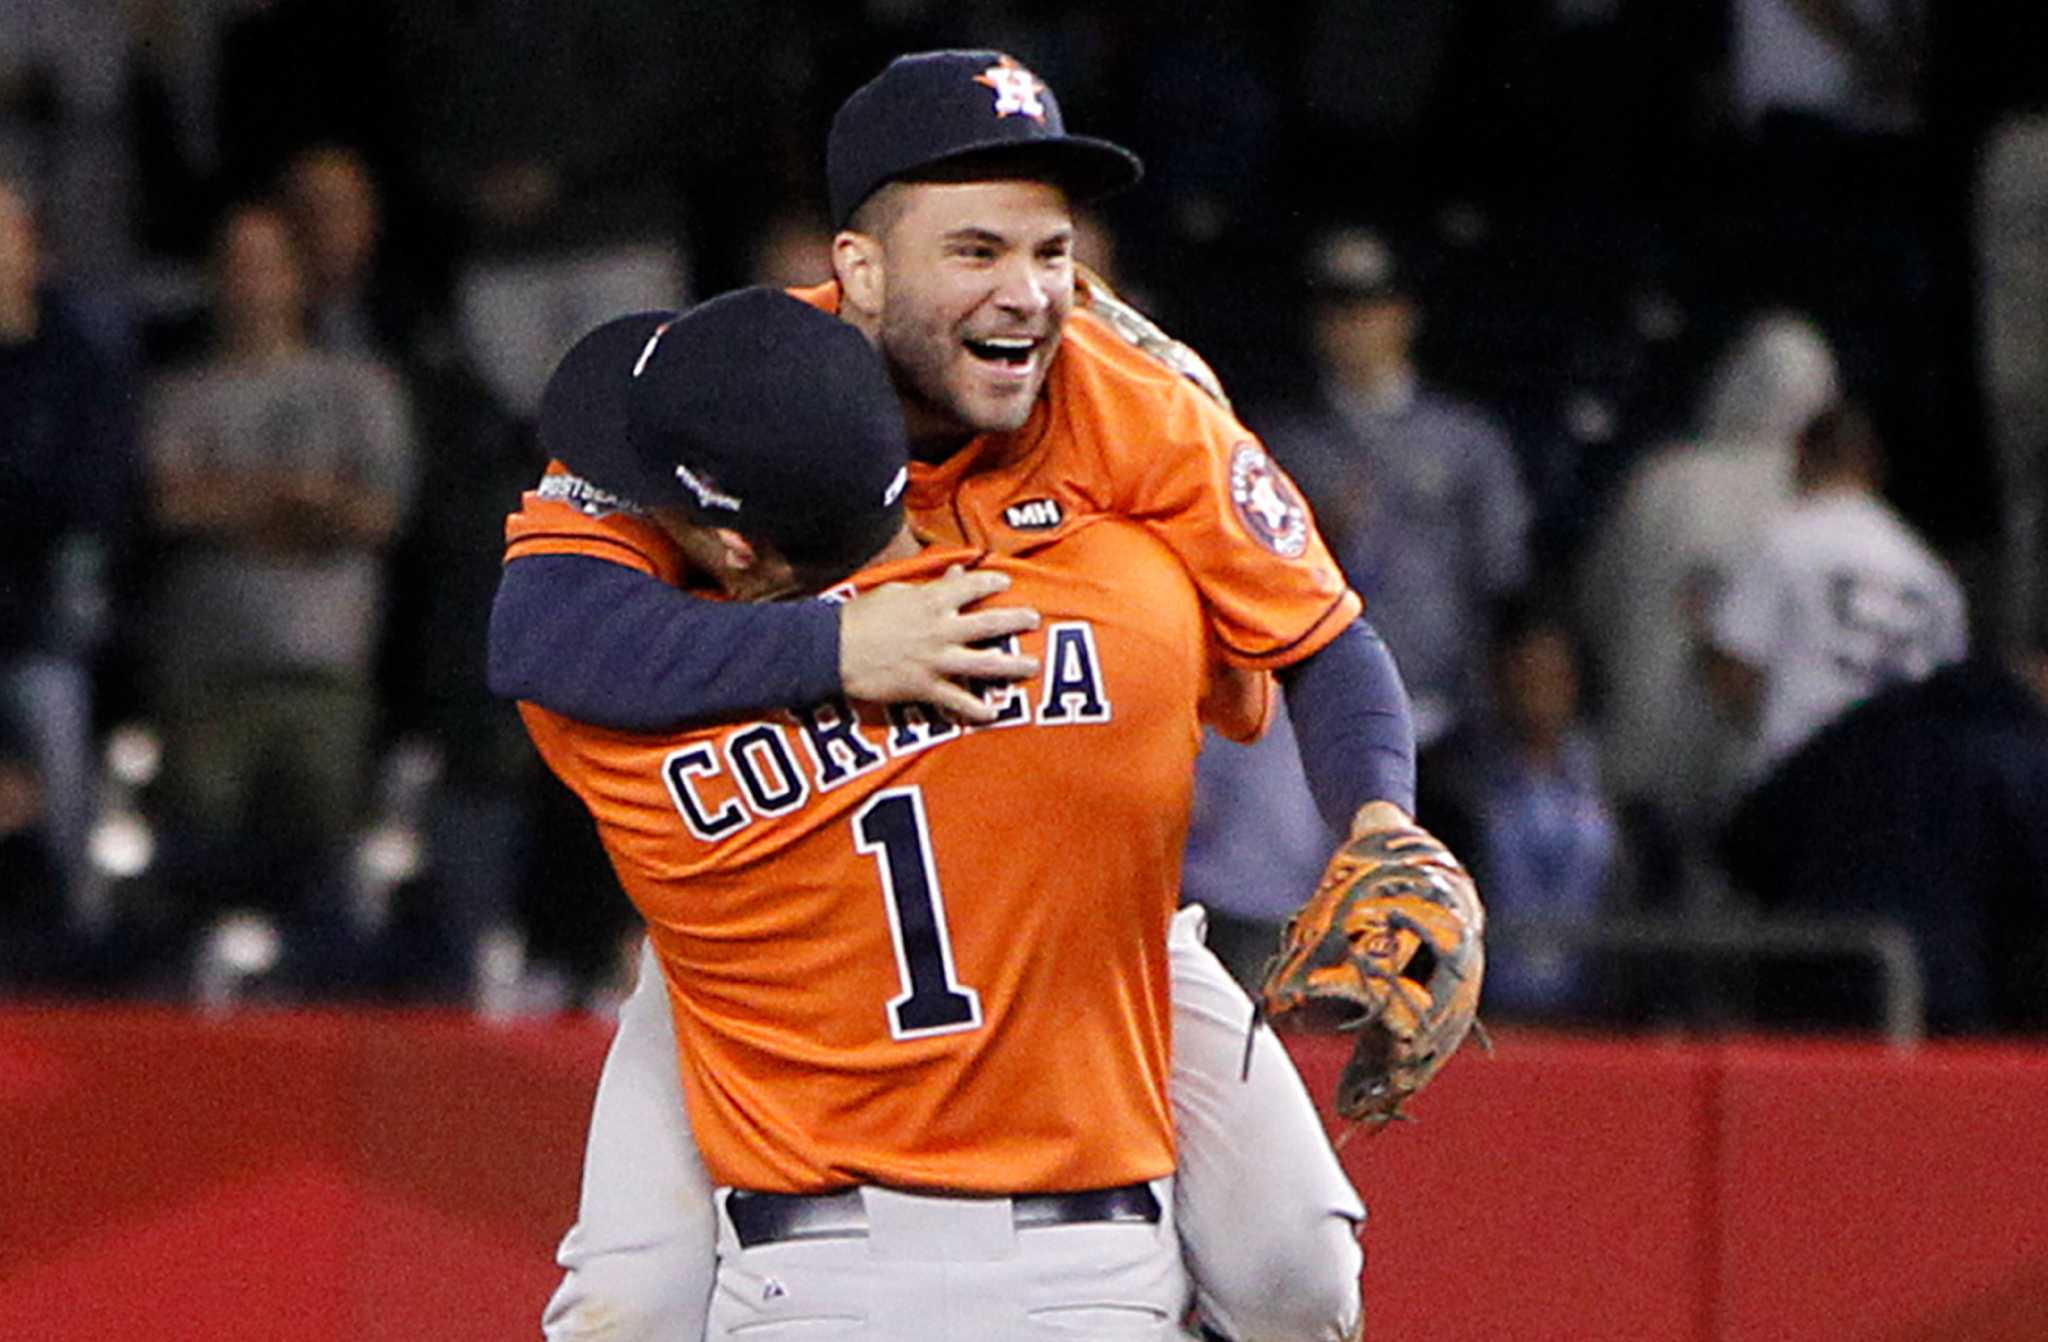 World Series champions Houston Astros surprise fans at Whataburger